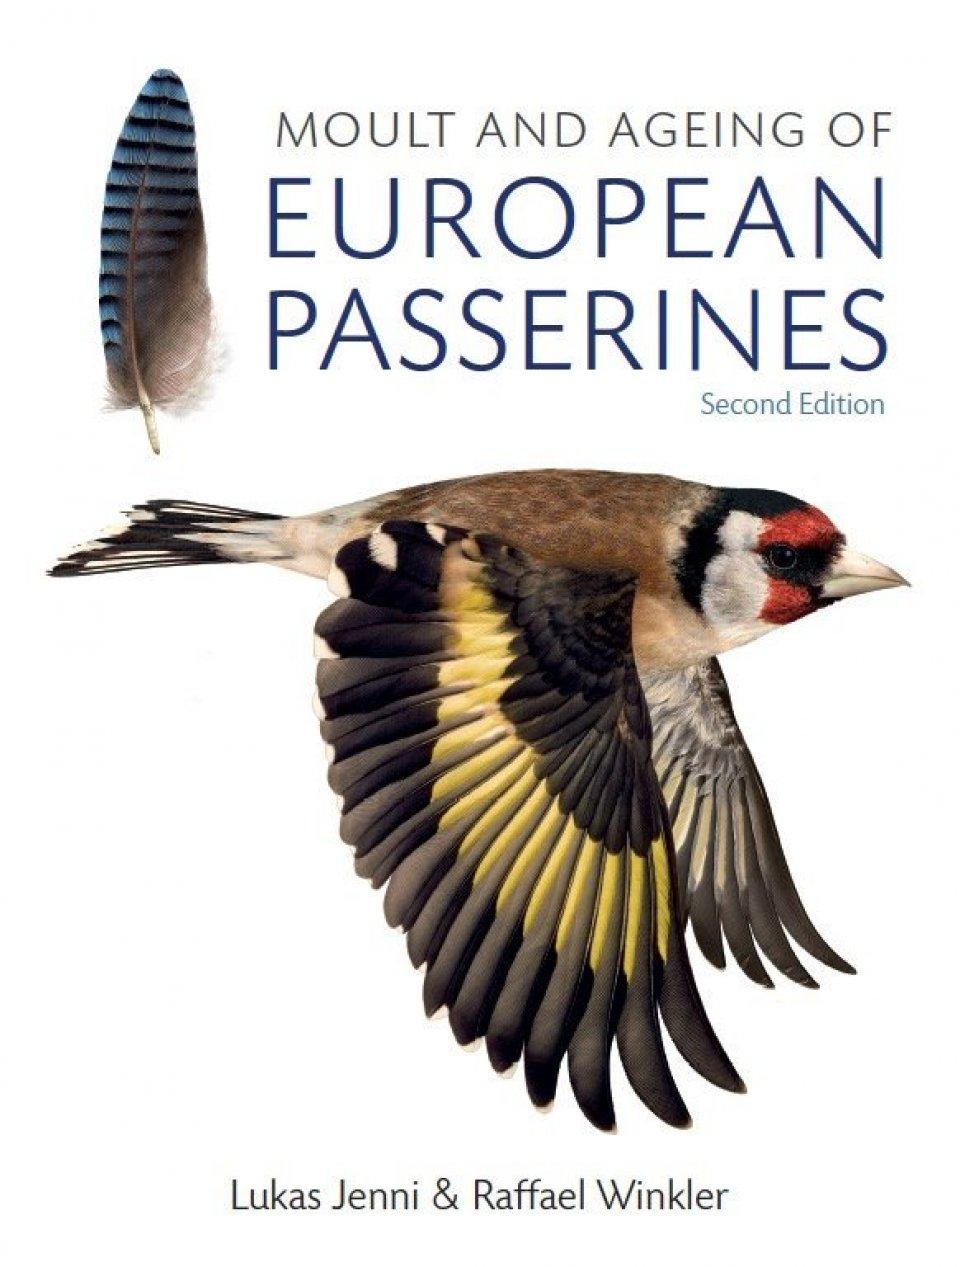 Moult and Ageing of European Passerines – Second Edition